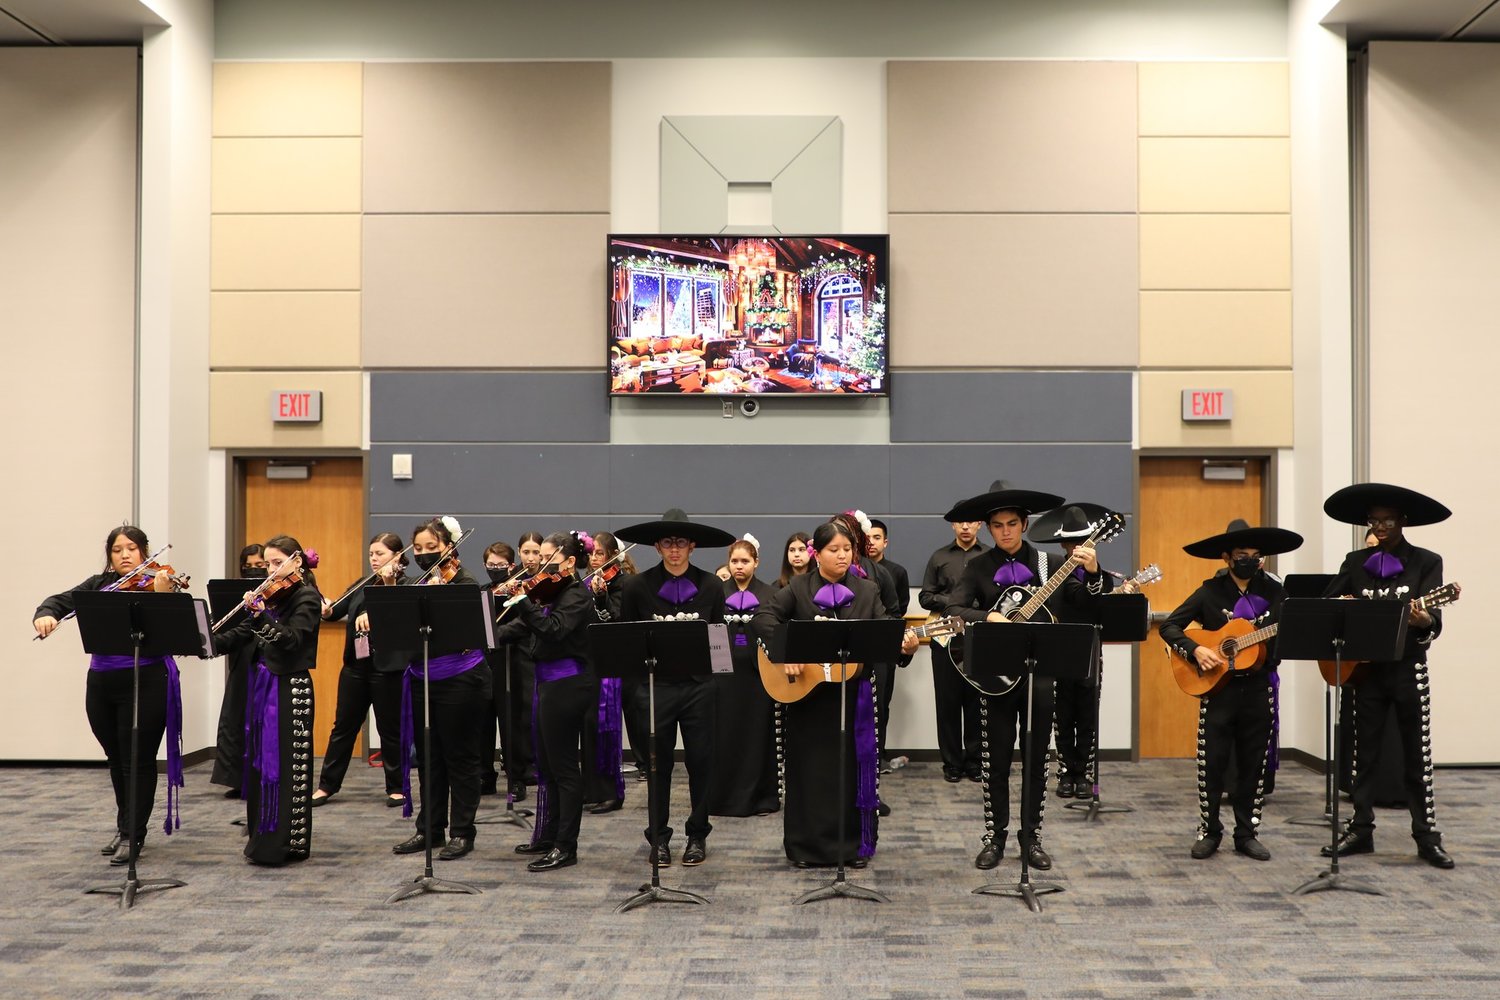 The Morton Ranch High mariachi band performed this month at the Katy ISD Education Support Center, 6301 S. Stadium Dr.